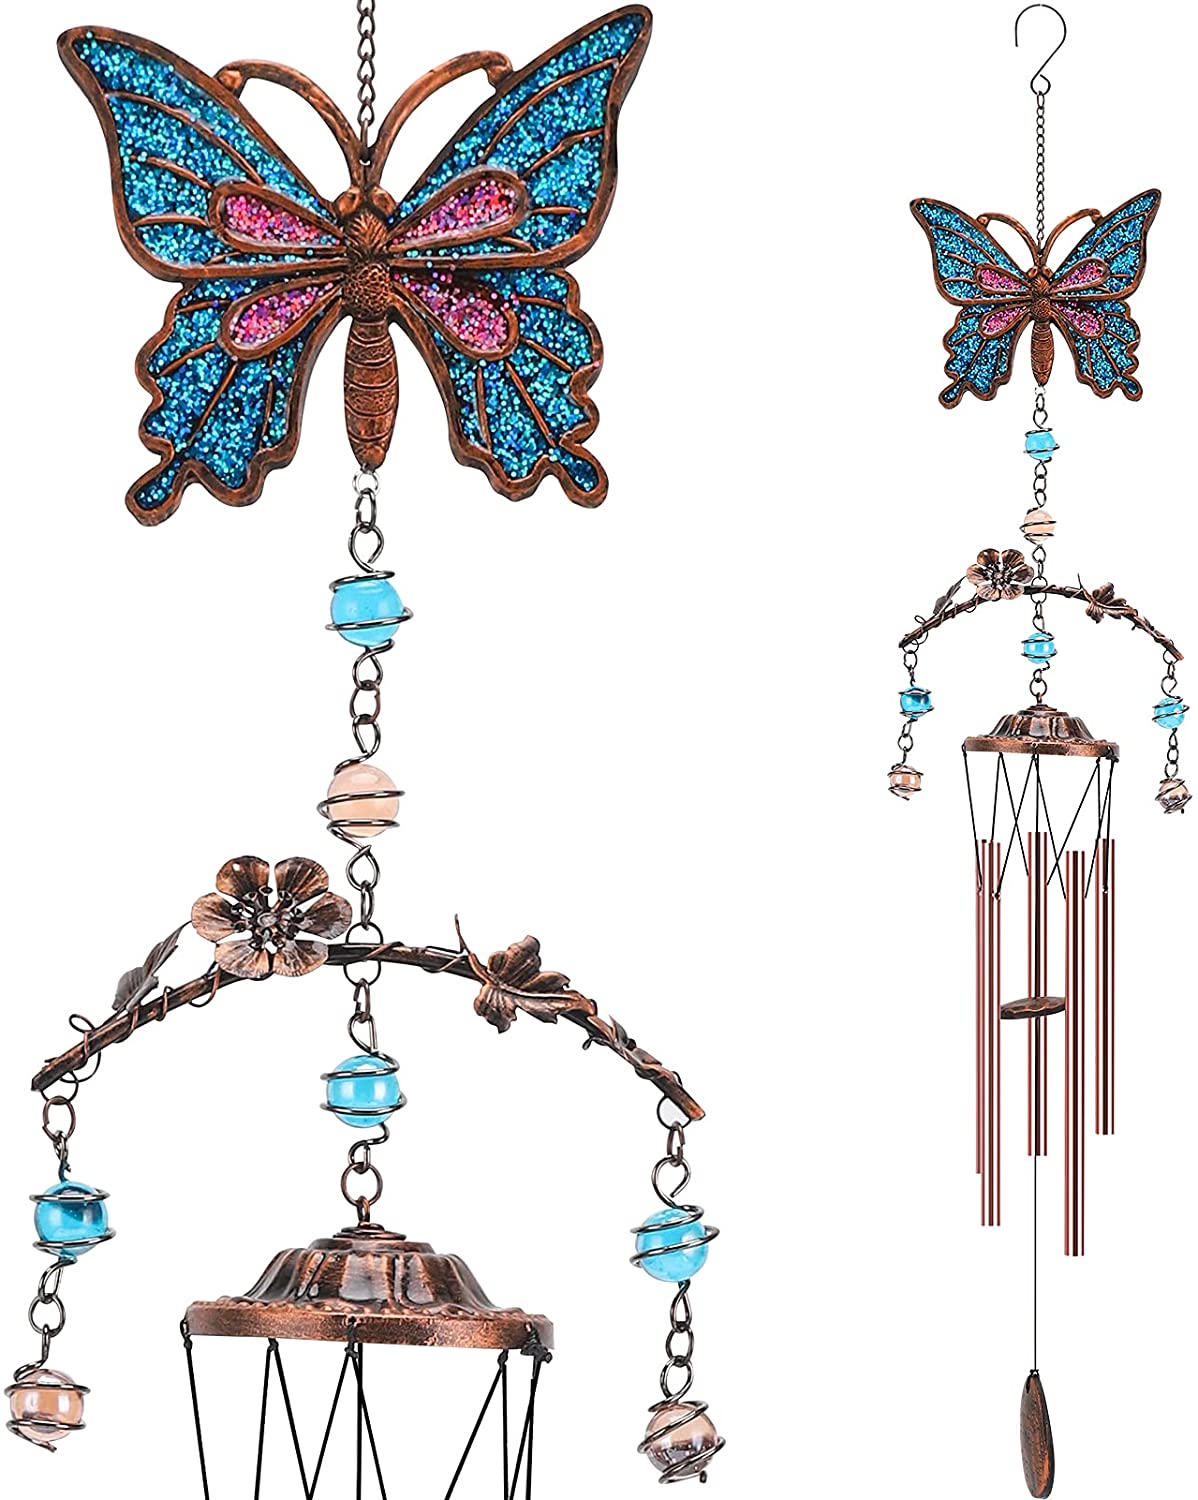 Butterflies Aluminum Tube Windchime with S Hook,Patio Garden Decor Housewarming Gift. Wind Chimes Outdoor Clearance 